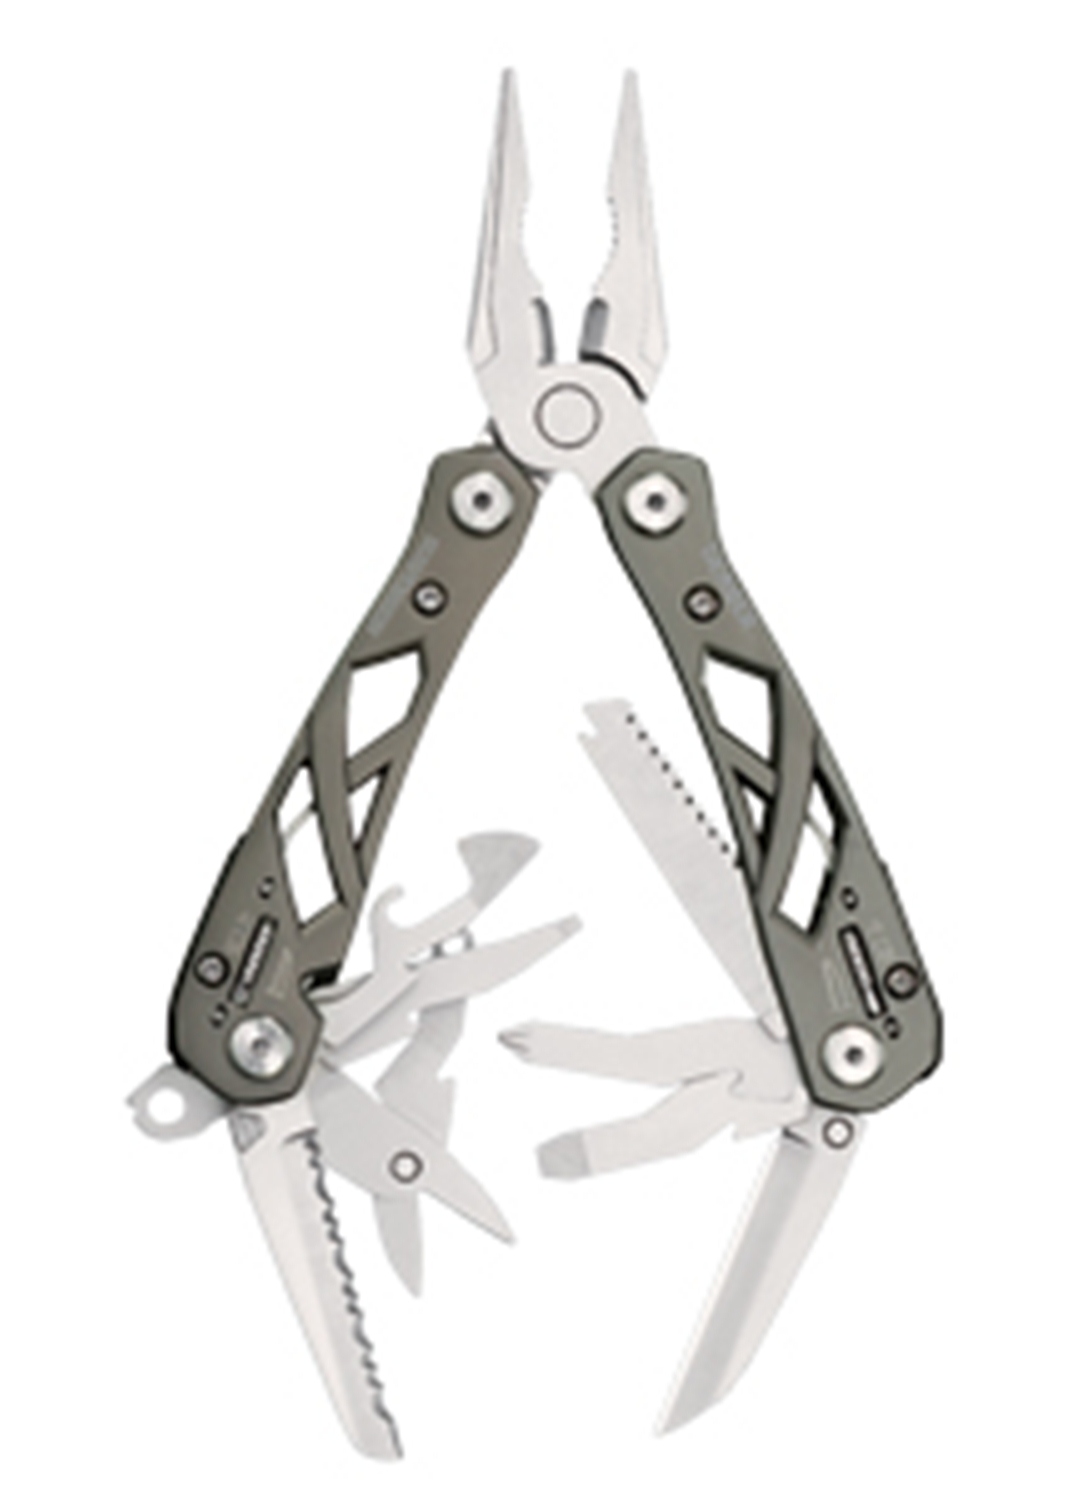 Gerber Legendary Blades Suspension Multi-Plier Clam Butterfly - 6 Inches